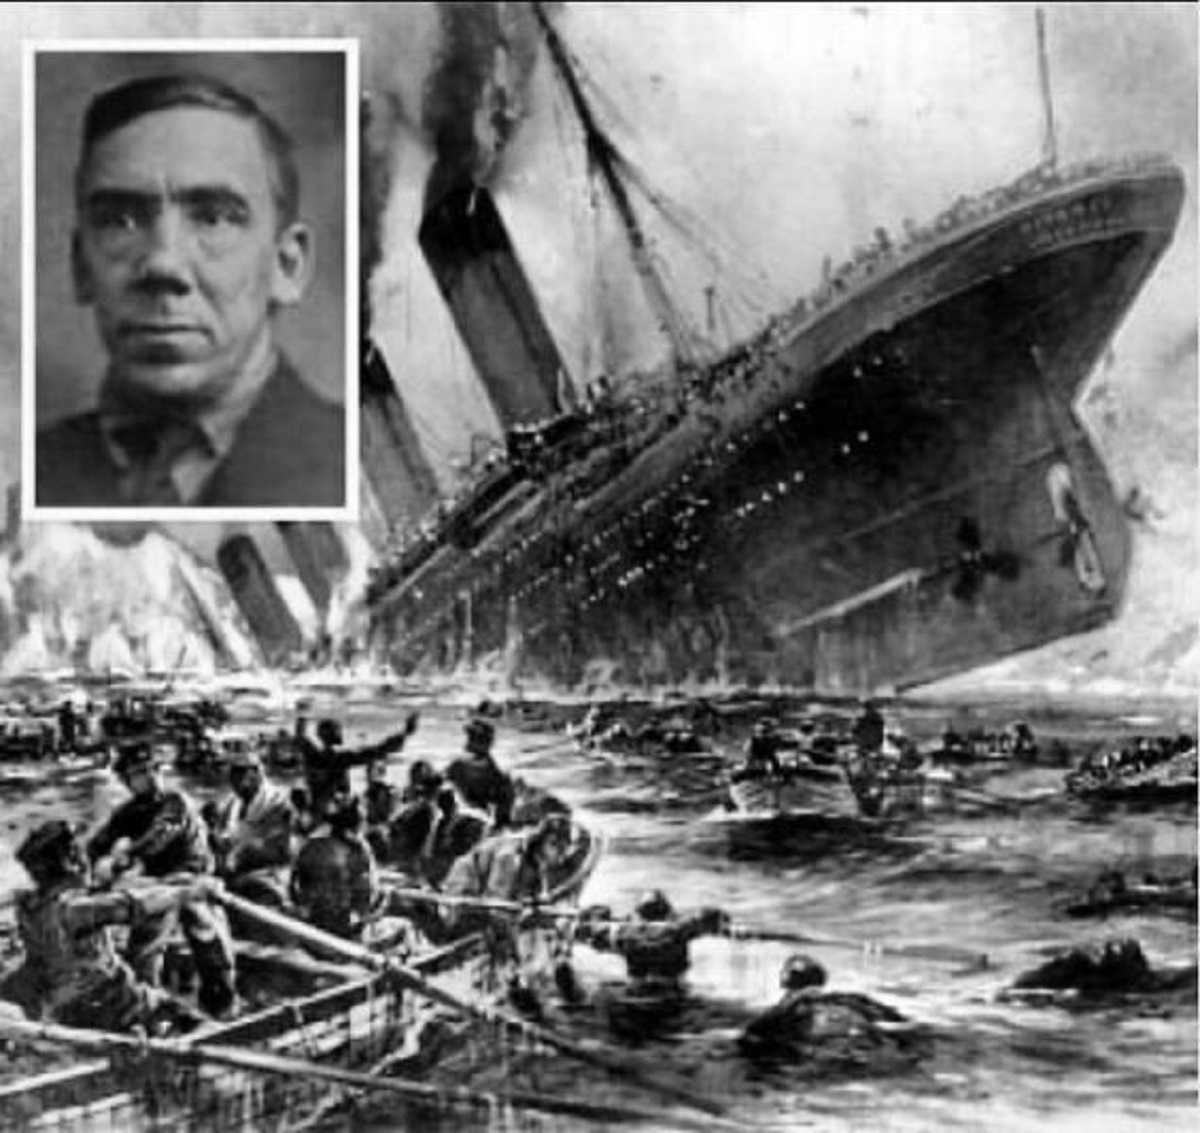 "Charles Joughin, The Chief Baker Aboard The Titanic, Emerged As An Improbable Survivor Of The Tragic Sinking Of The Ship"